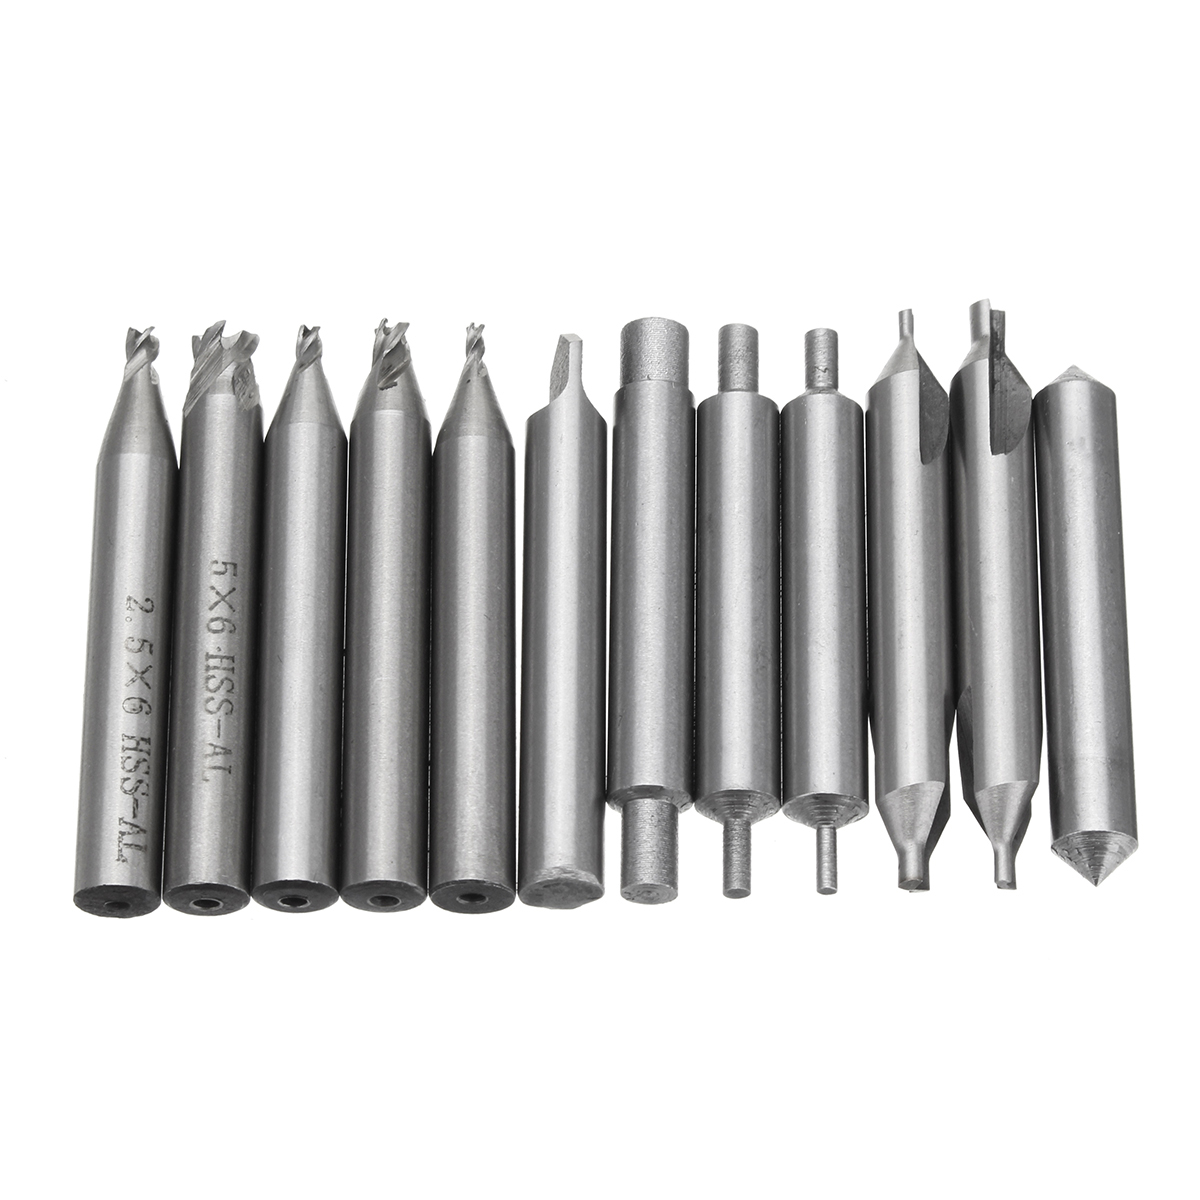 12pcs-HSS-Milling-Cutter-Drill-Bit-Set-Locksmith-Tools-Vertical-Spare-Parts-For-Key-Cutting-Machine-1403807-8